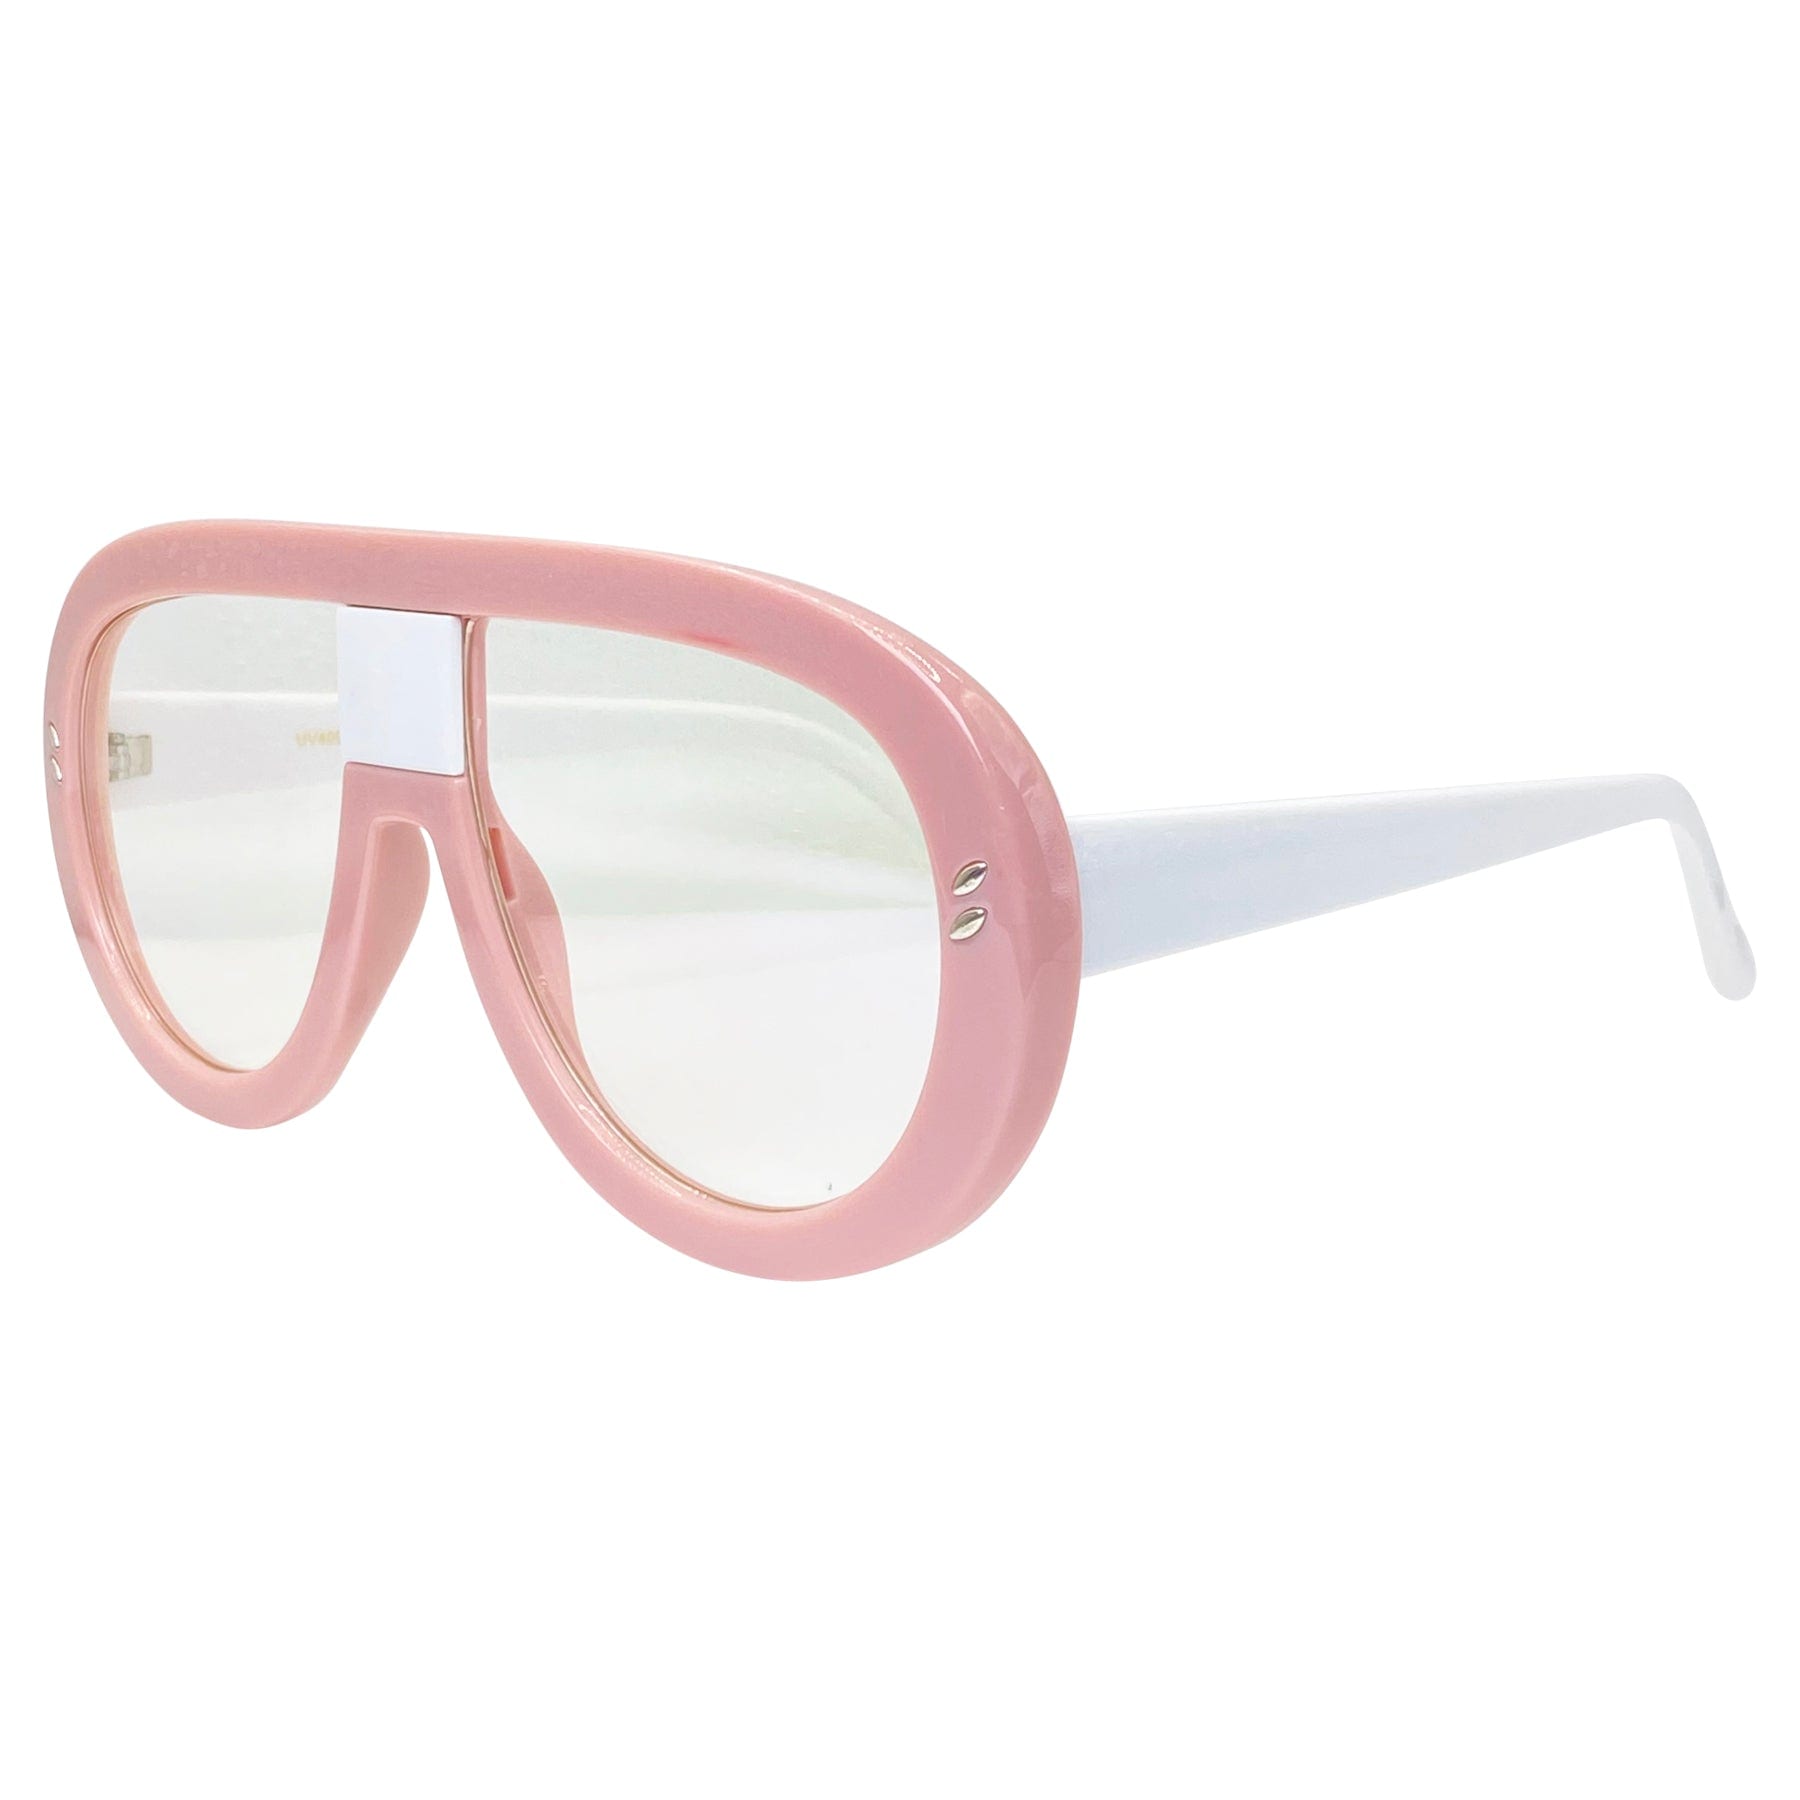 chunky big glasses with a white and pink aviator frame 